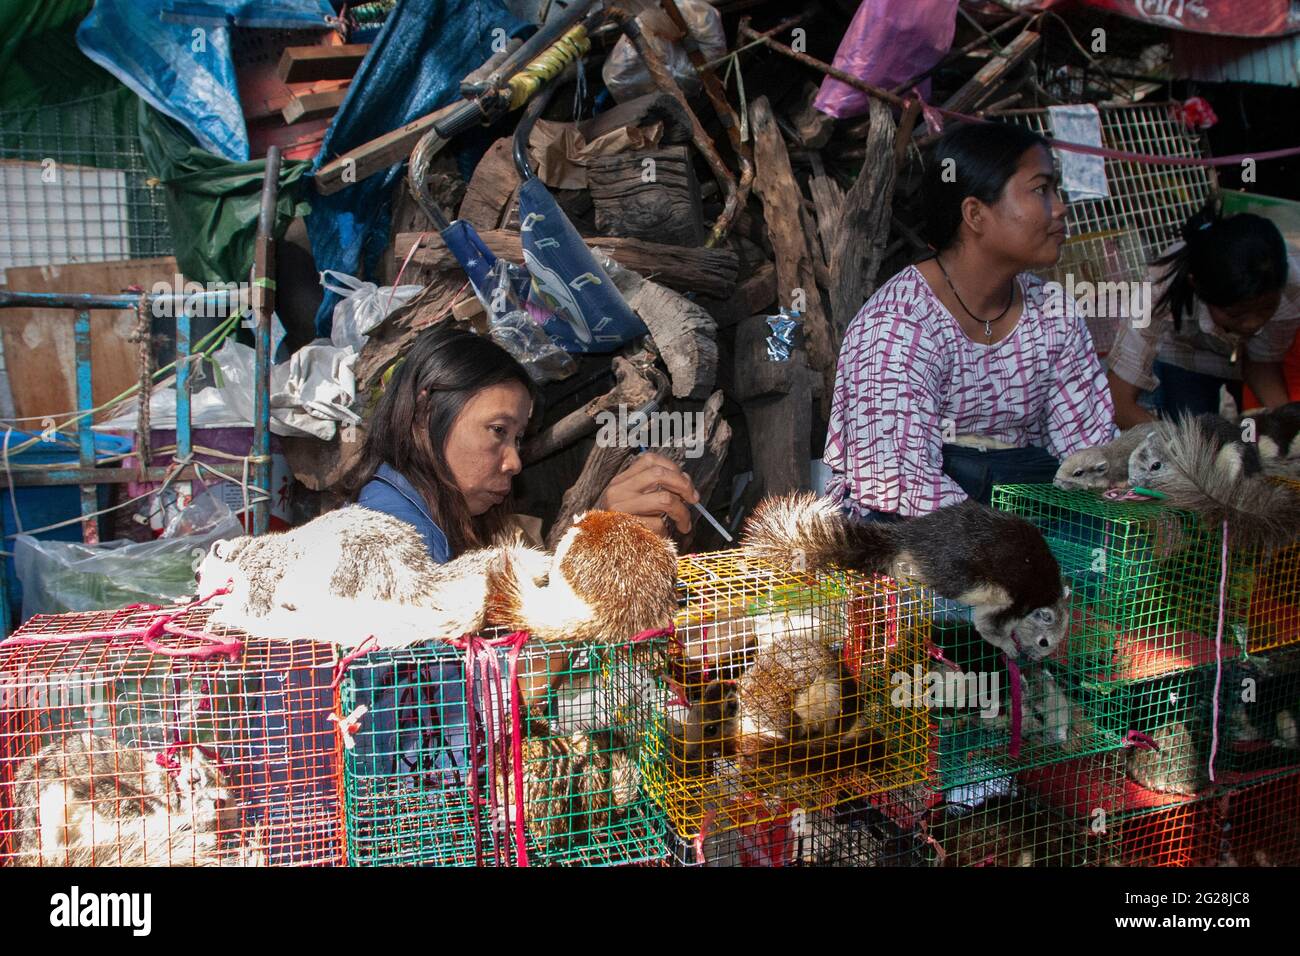 Wild animals on sale at a stall at the animal market in Bangkok, Thailand Stock Photo